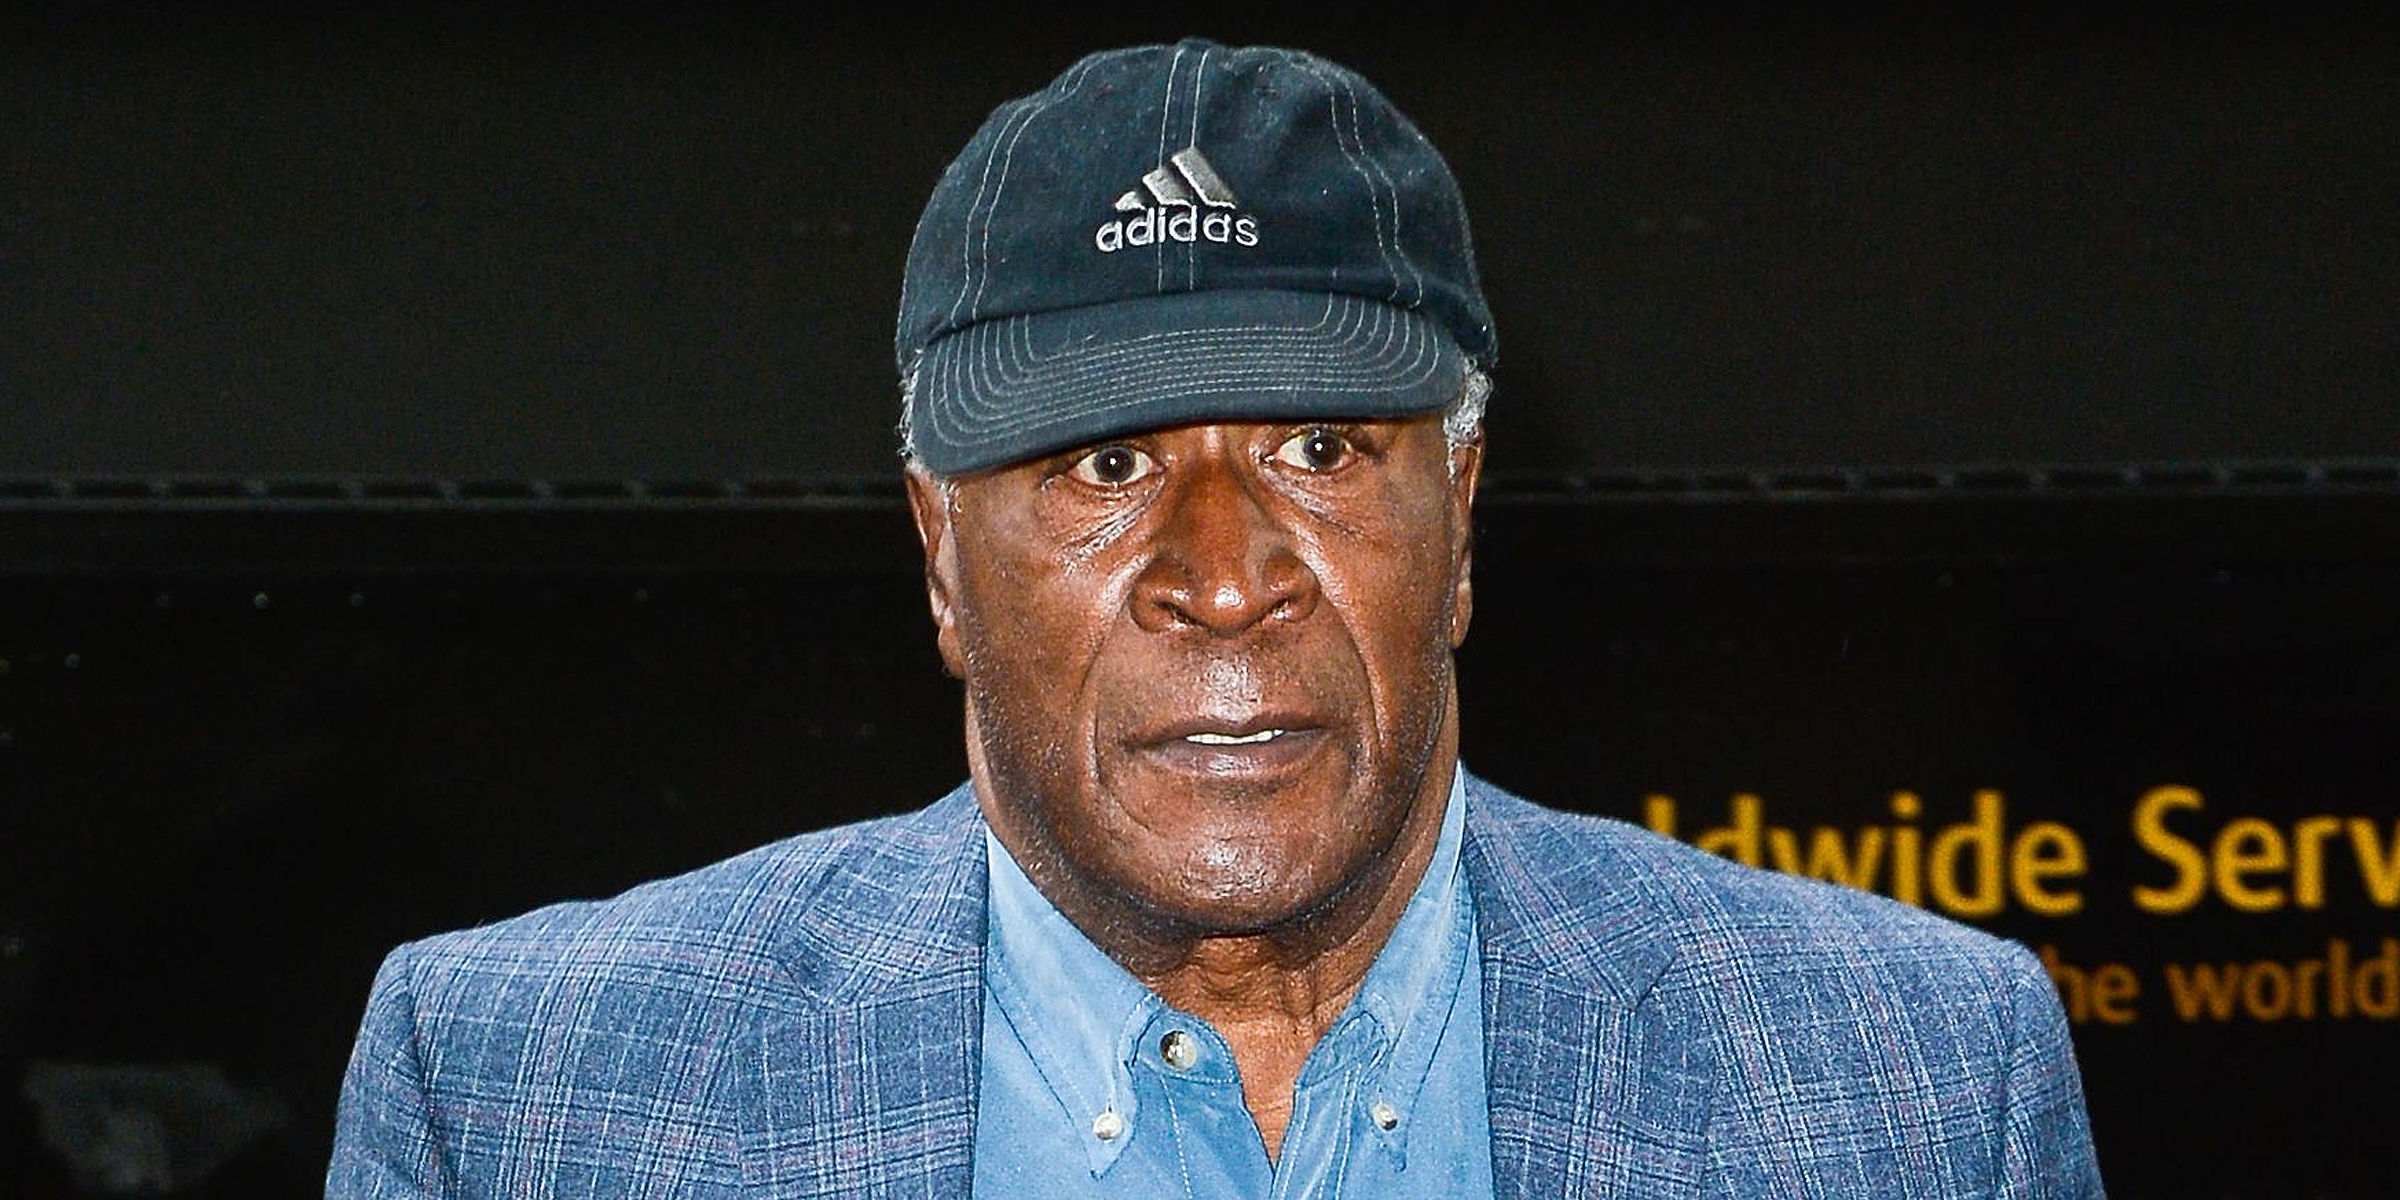 John Amos, 2016 | Source: Getty Images